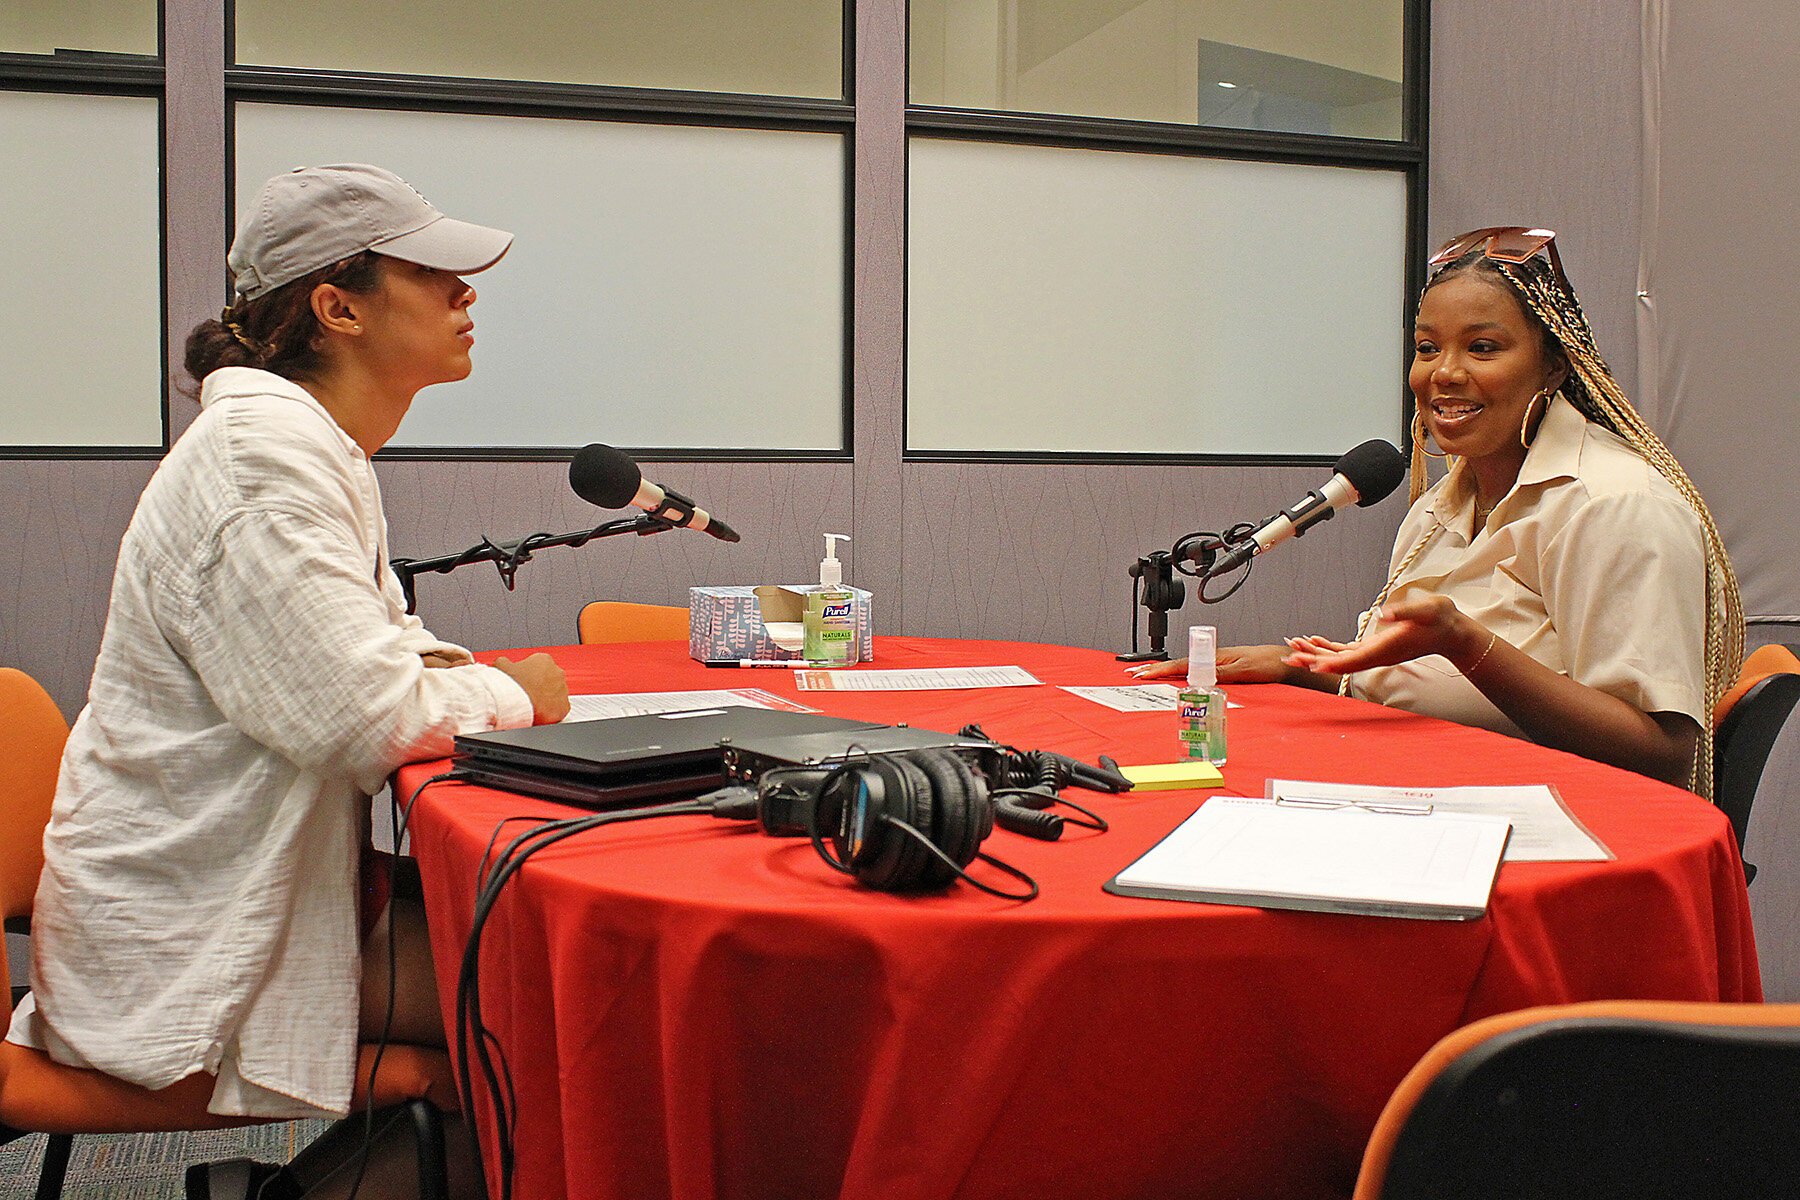 StoryCorps Manager Franchesca Peña (left) and Facilitator Shira Smillie demonstrate how a recording session at the library looked. In an actual session the facilitator sat at the table end wearing the headphones.